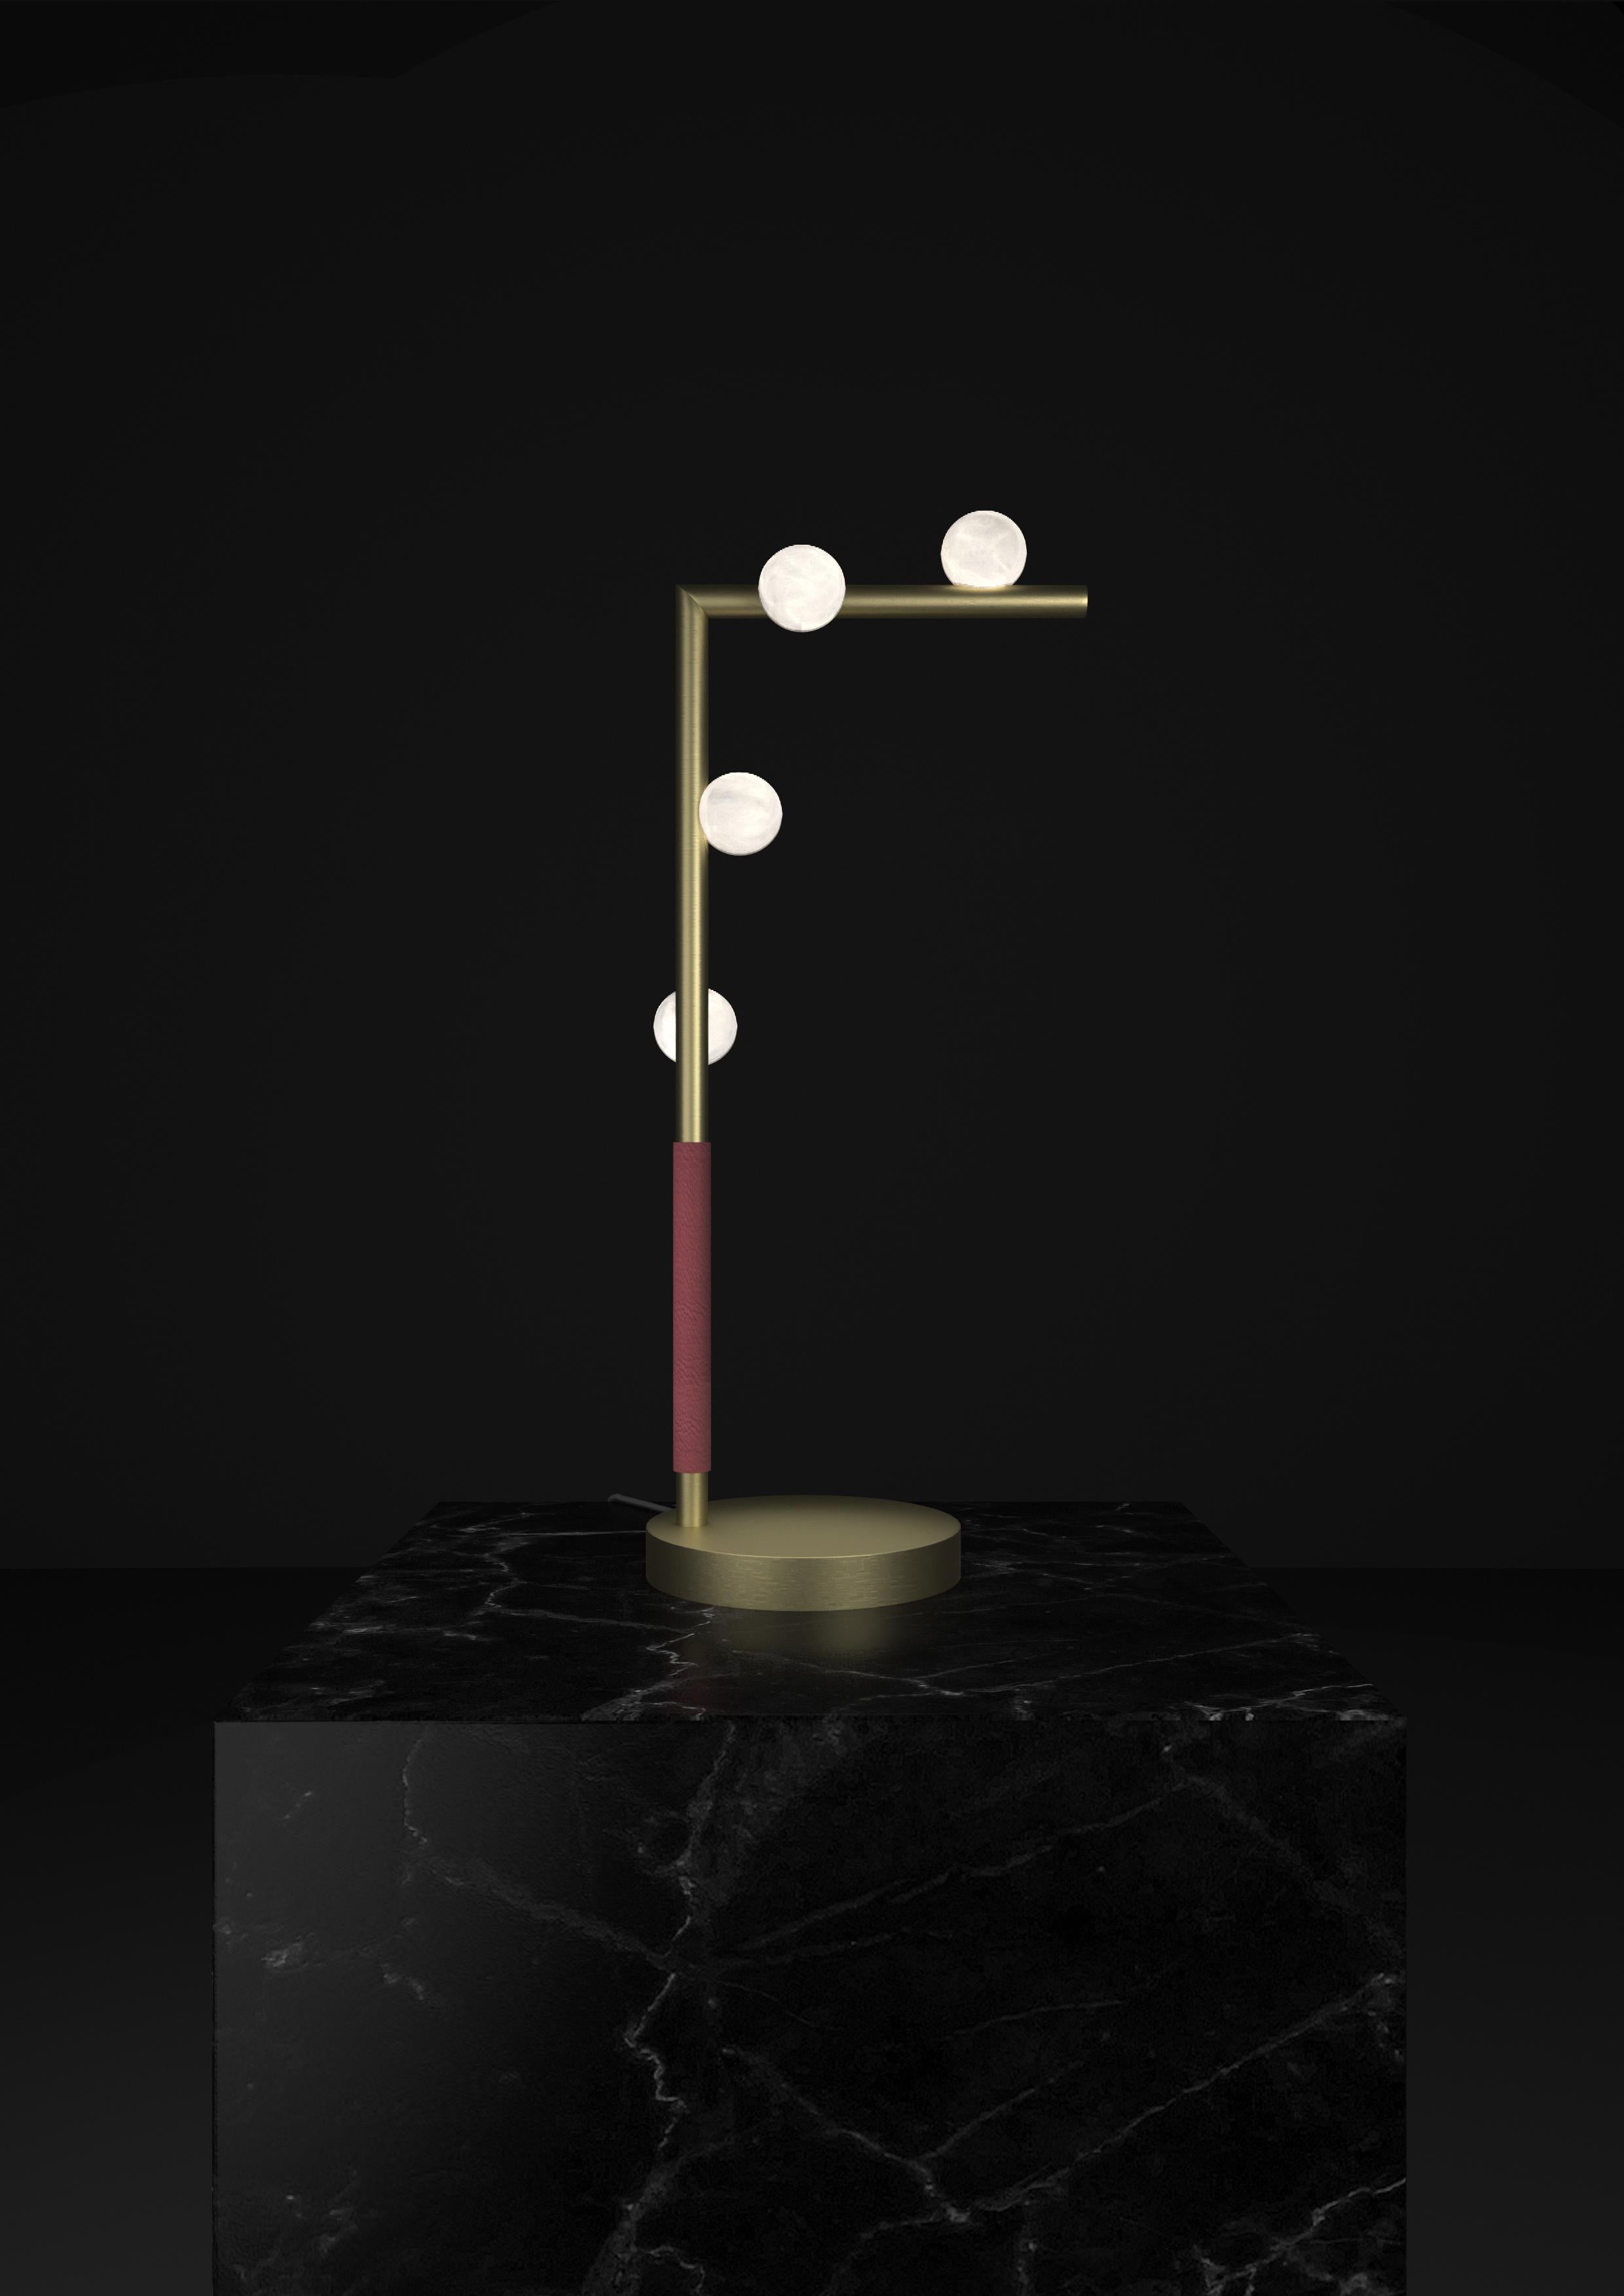 Demetra Brushed Brass Table Lamp by Alabastro Italiano
Dimensions: D 20 x W 35 x H 67 cm.
Materials: White alabaster, brass and leather.

Available in different finishes: Shiny Silver, Bronze, Brushed Brass, Ruggine of Florence, Brushed Burnished,